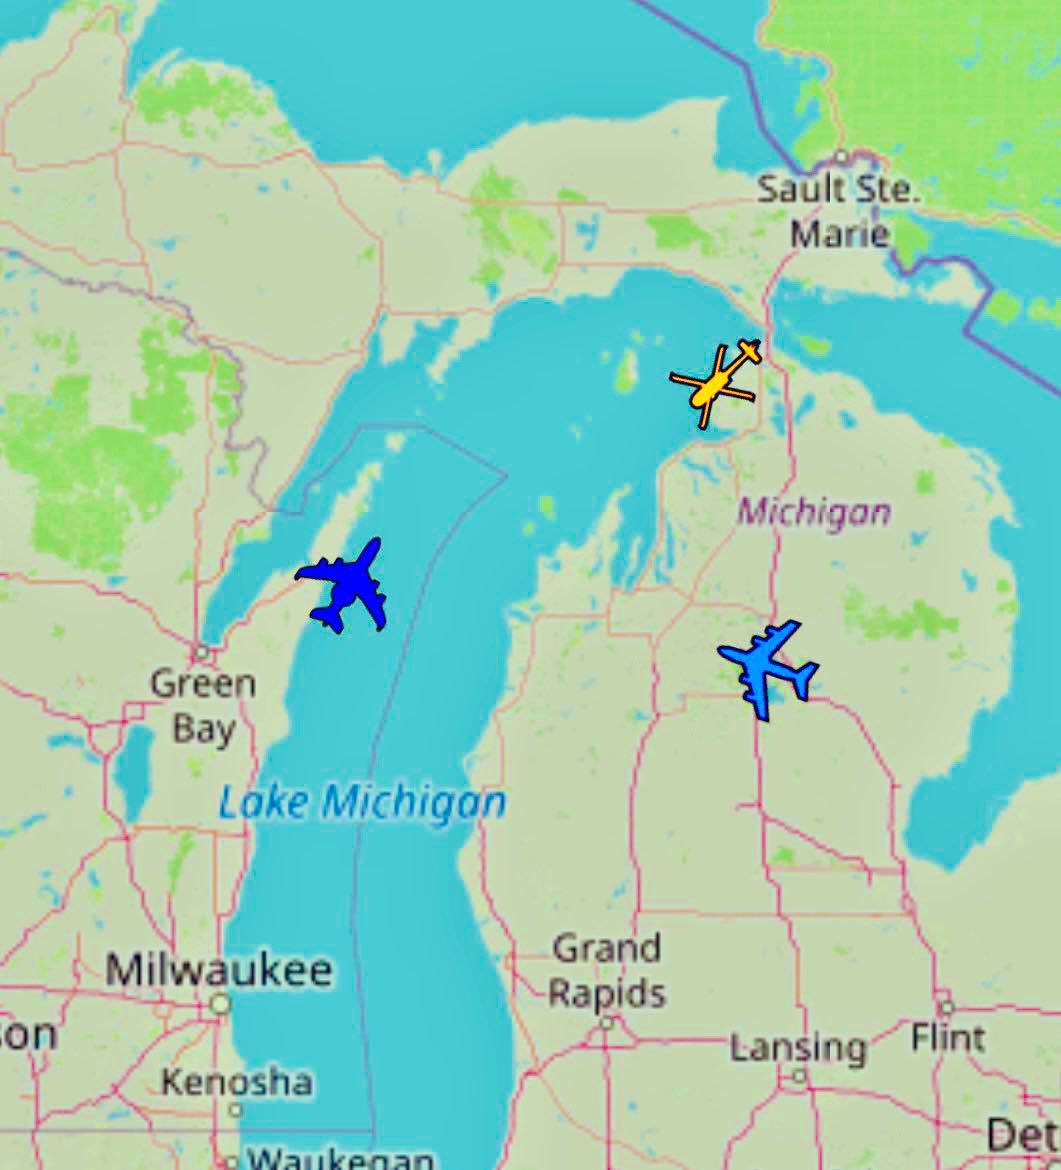 US Air Force Sentry Surveillance Aircraft, Stratotanker, and Black Hawk helicopter all spotted in vicinity of Lake Michigan